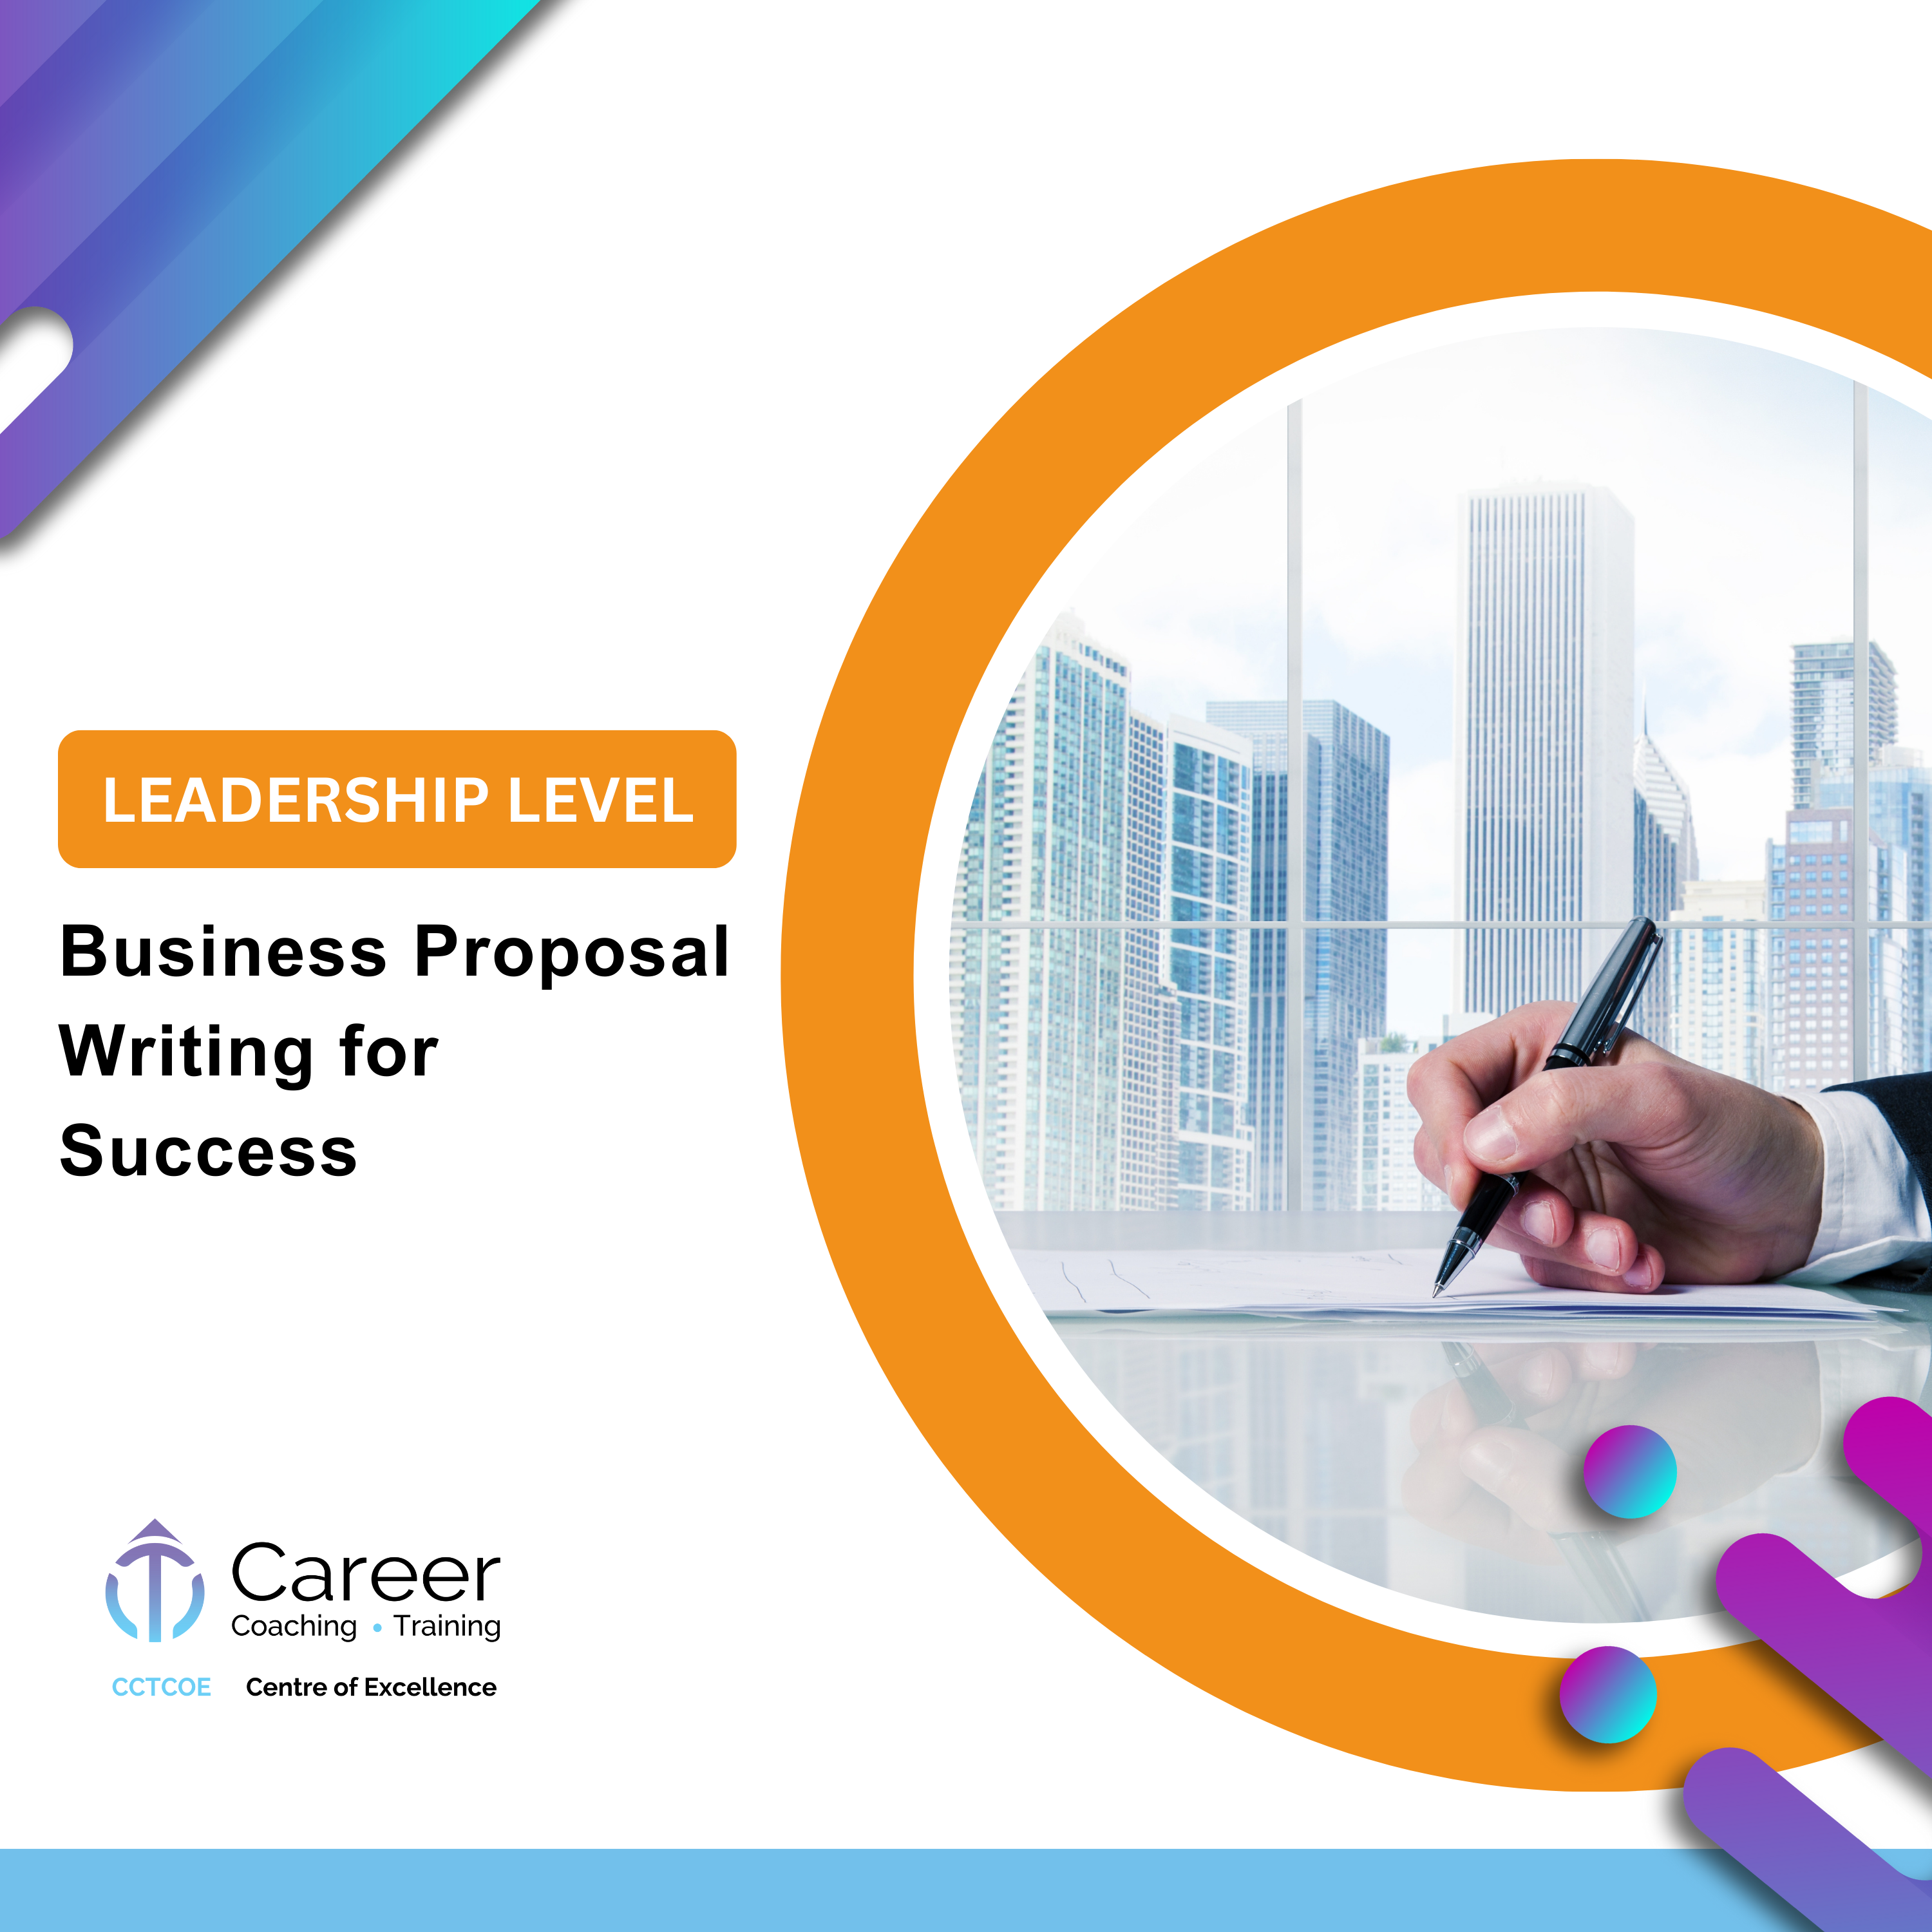 Business Proposal Writing for Success